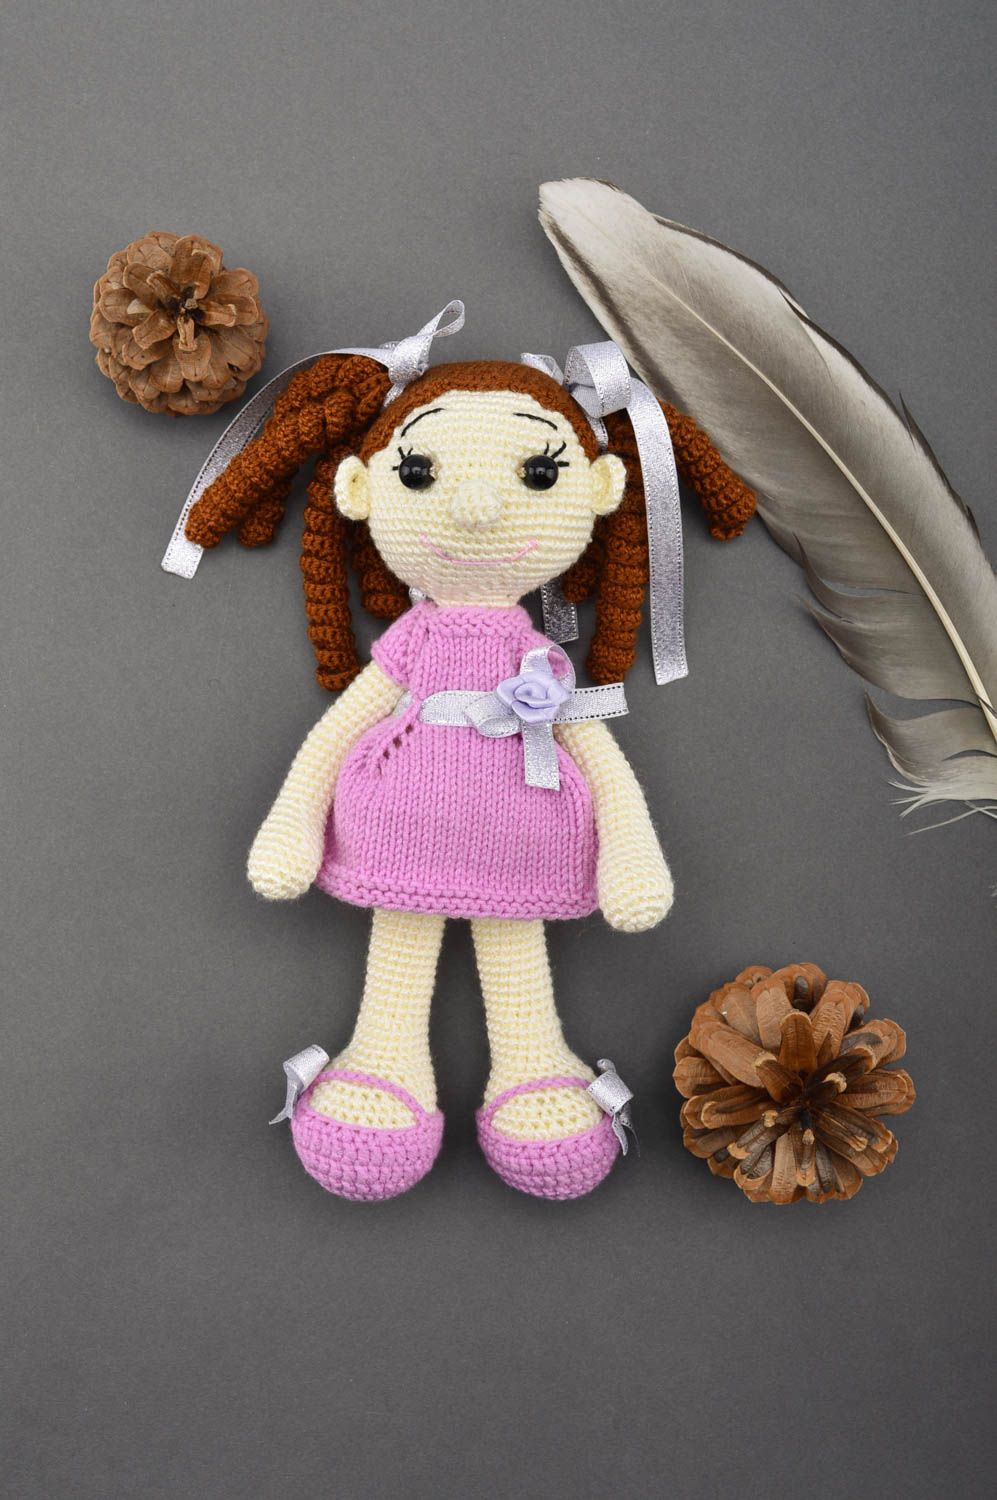 Handmade doll unusual toy crocheted doll for girls gift for kids textile doll photo 1